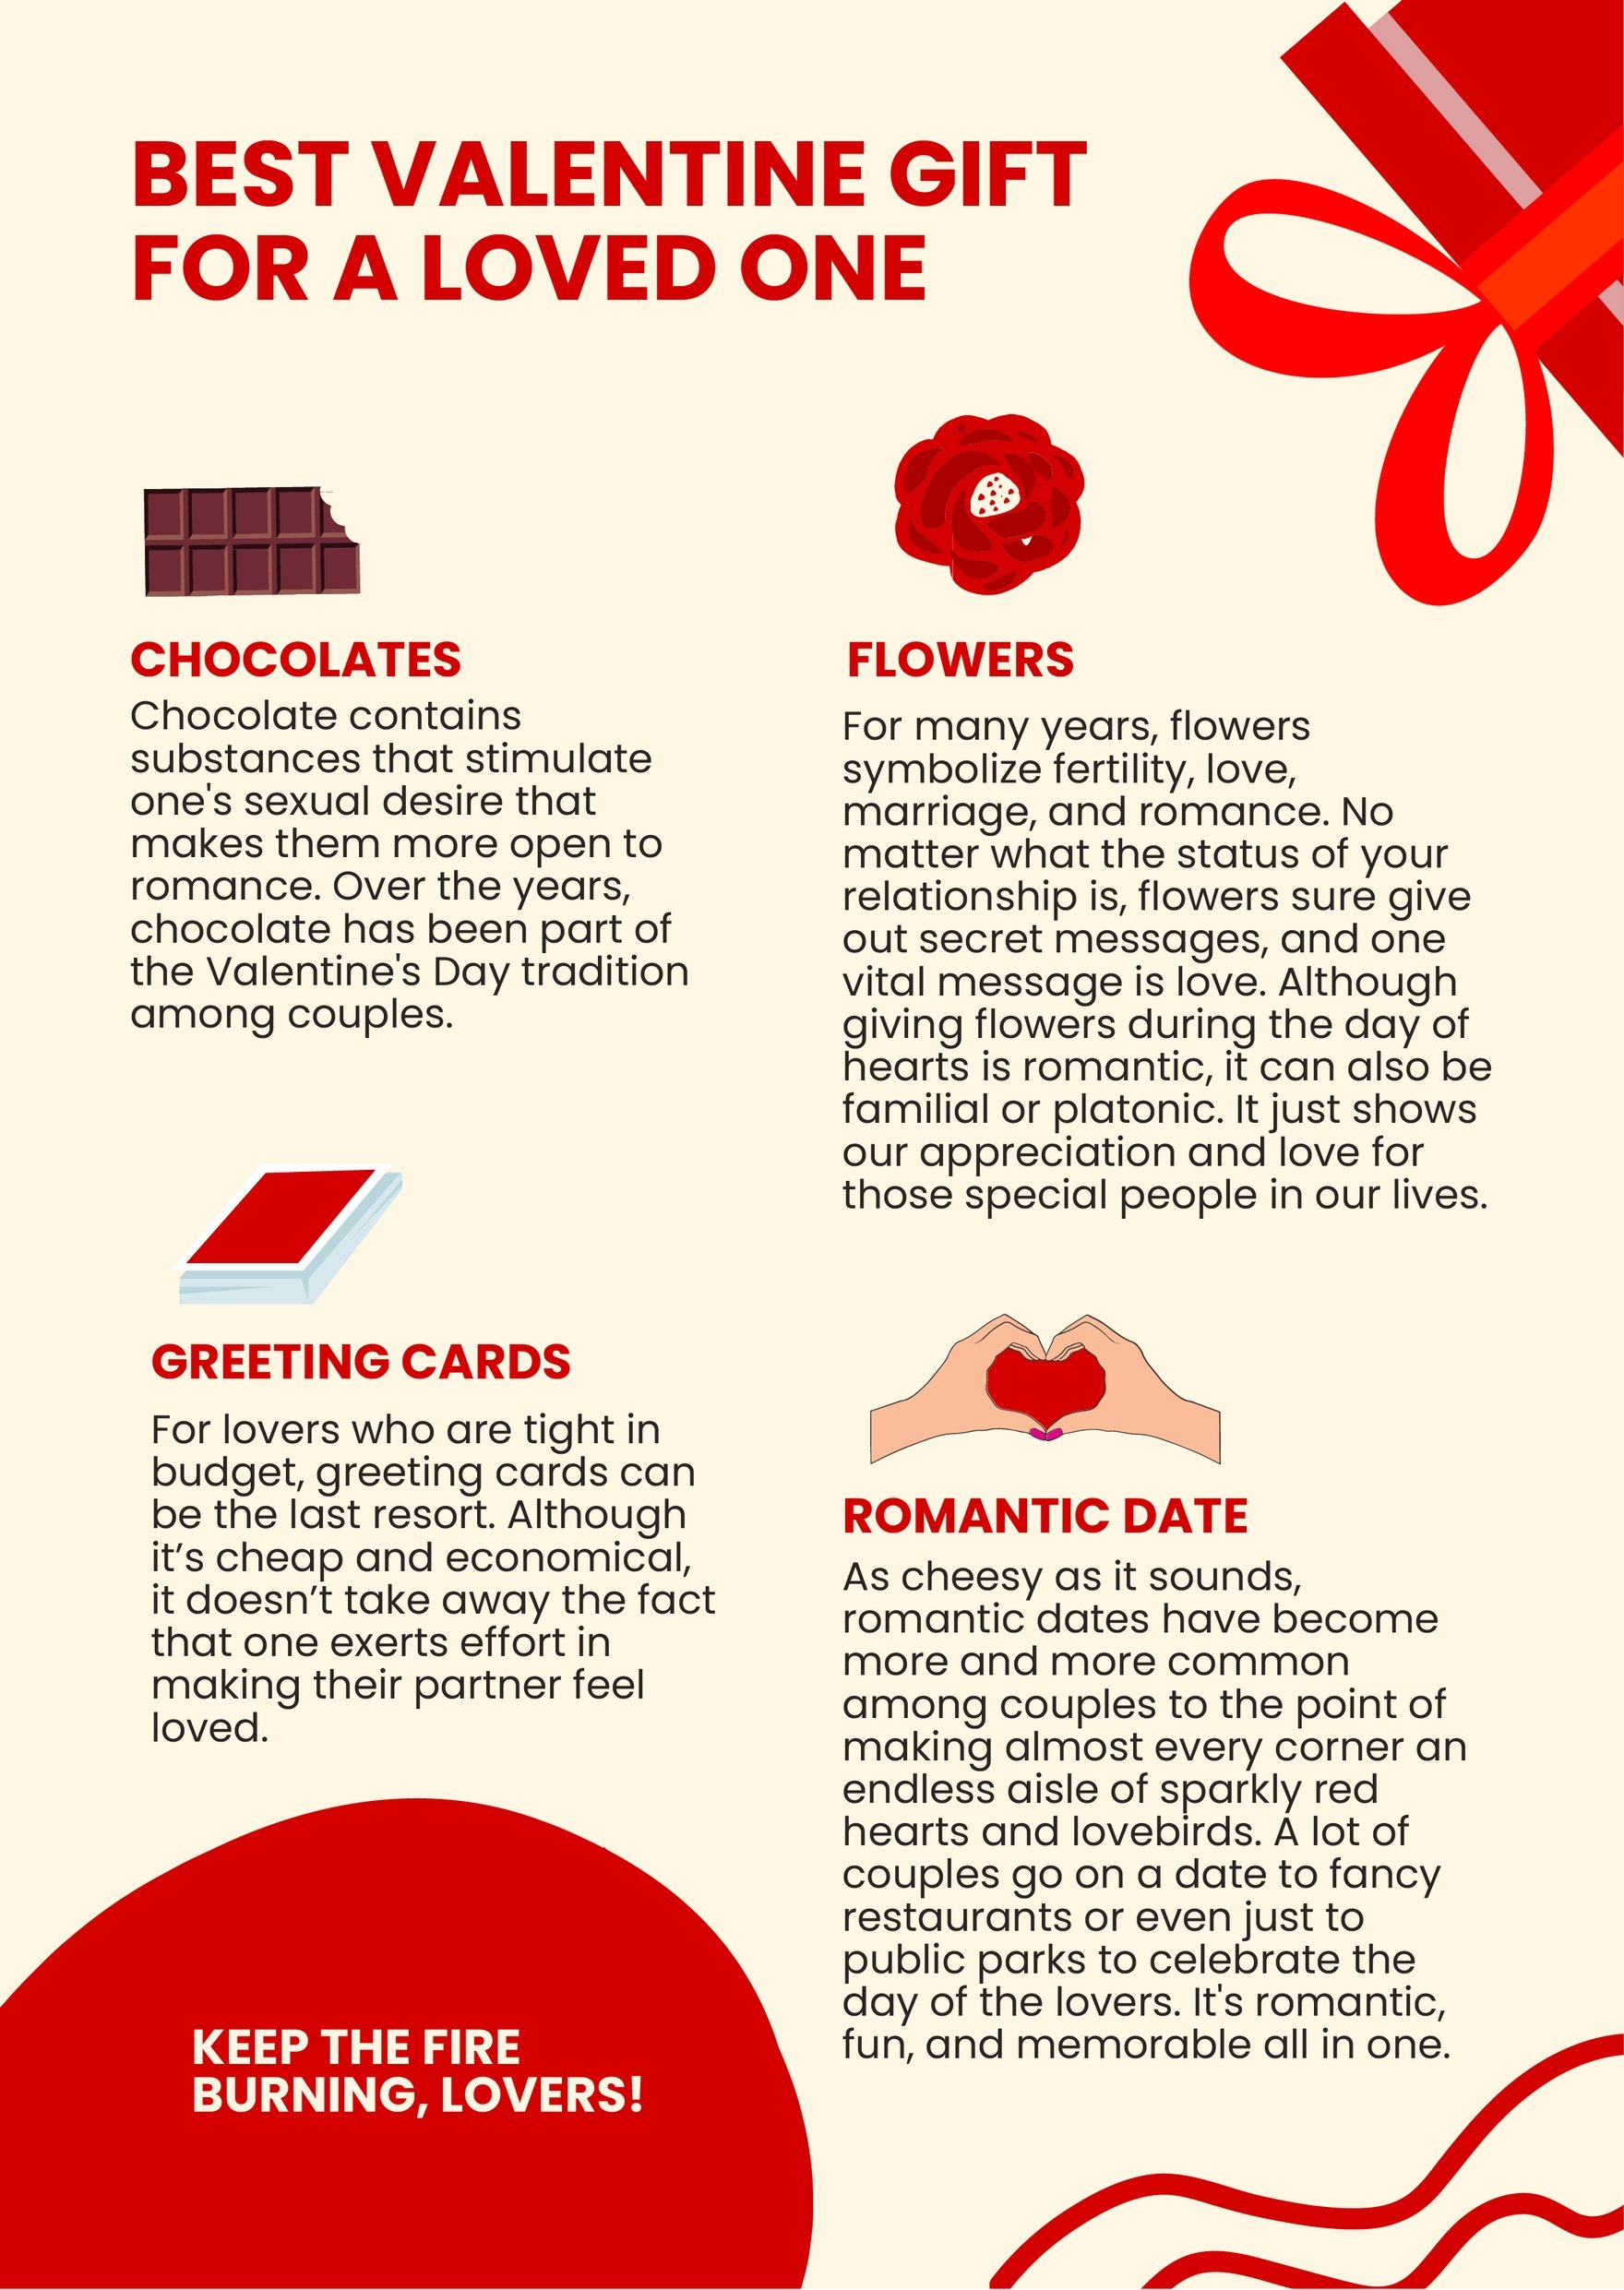 Free Valentine's Day Gifts Infographic